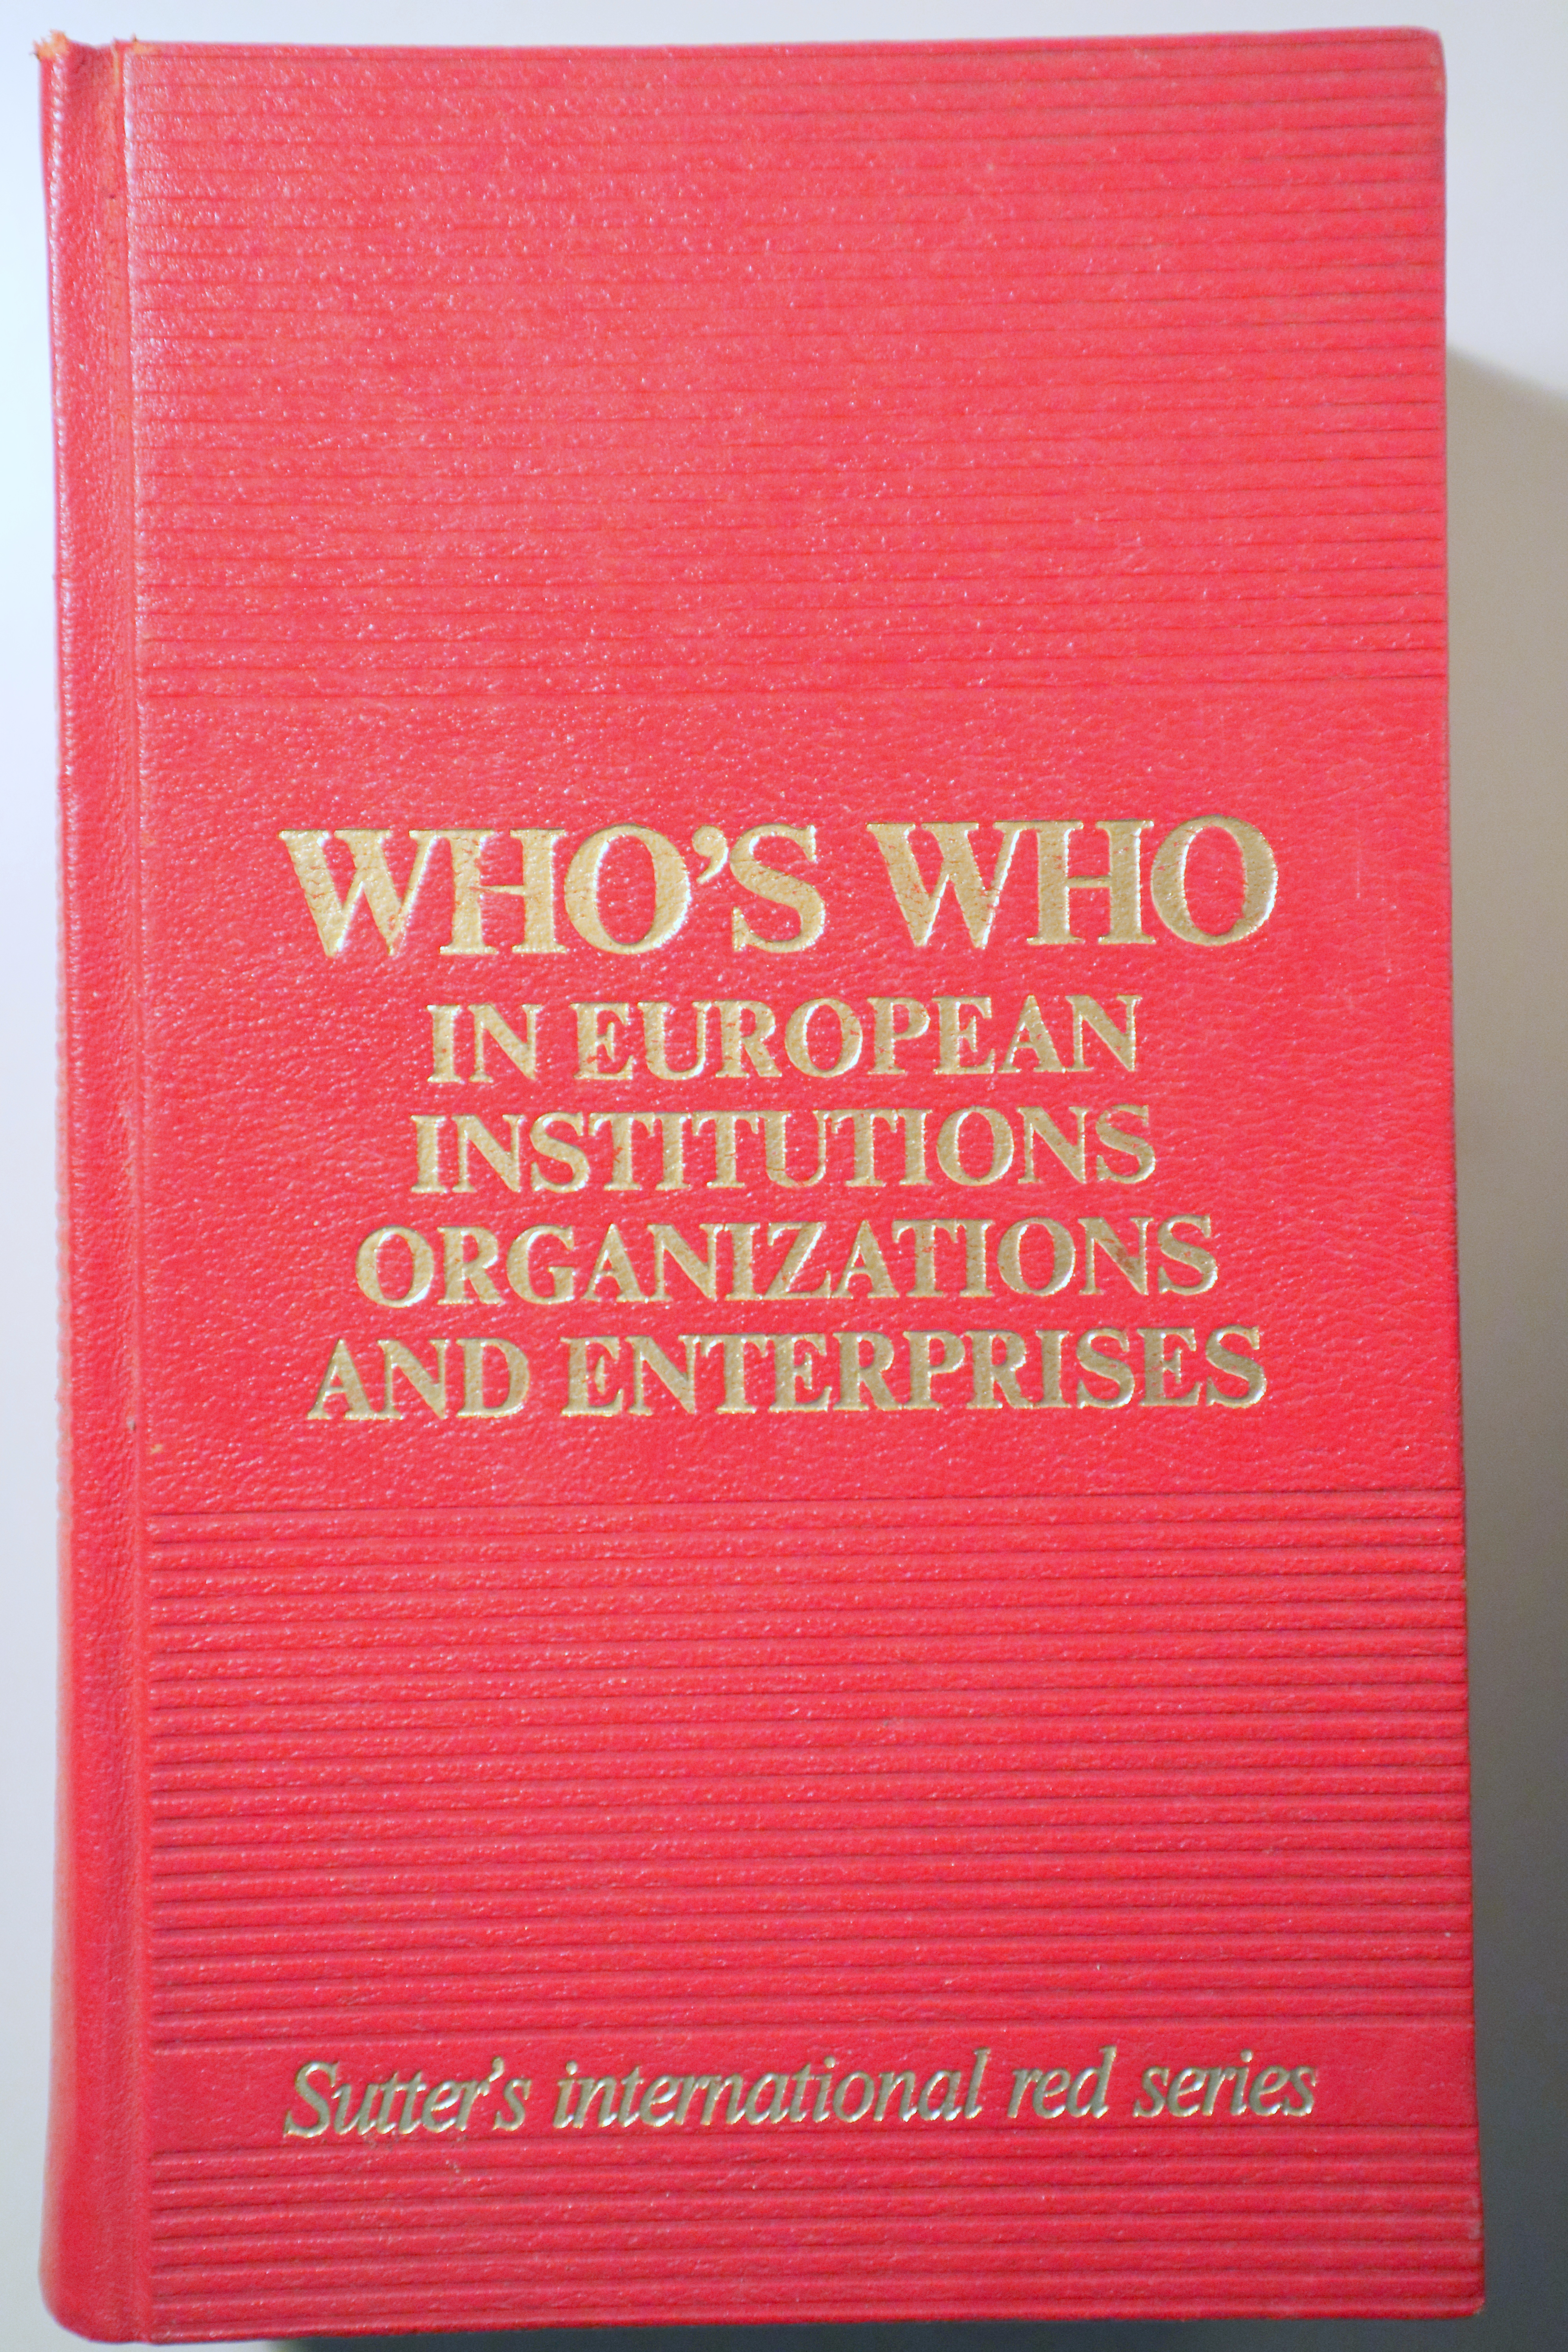 WHO'S WHO IN EUROPEAN INSTITUTIONS ORGANIZATIONS AND ENTERPRISES - Zürich 1985